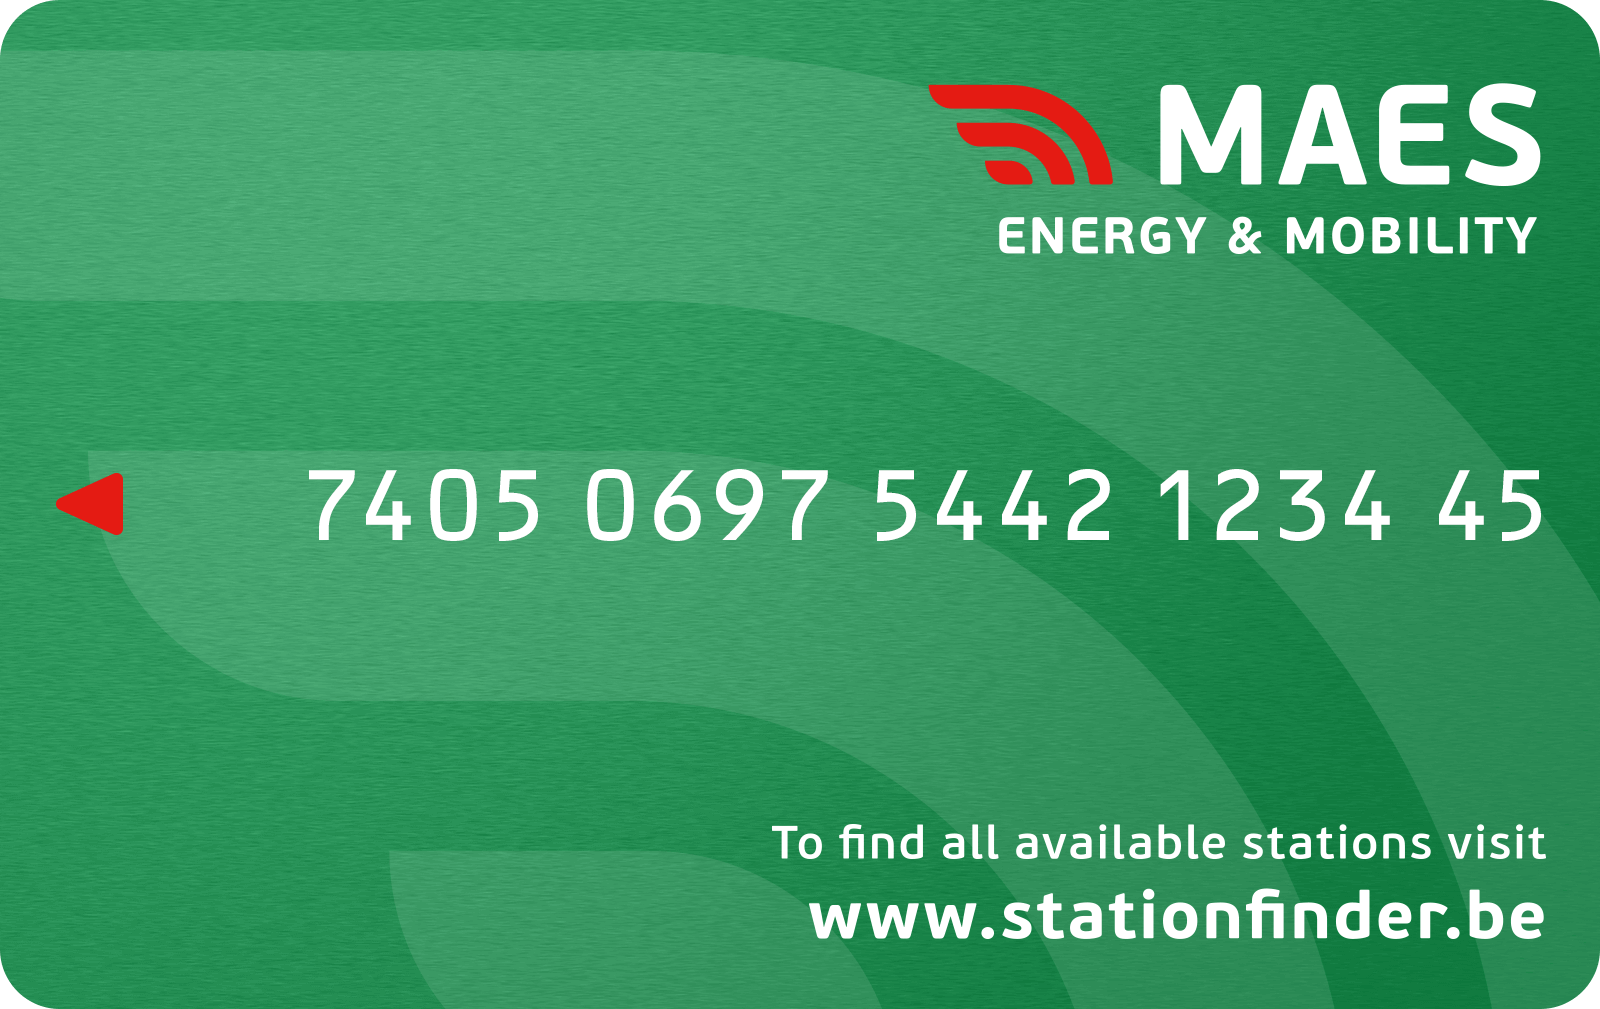 MAES fuel card